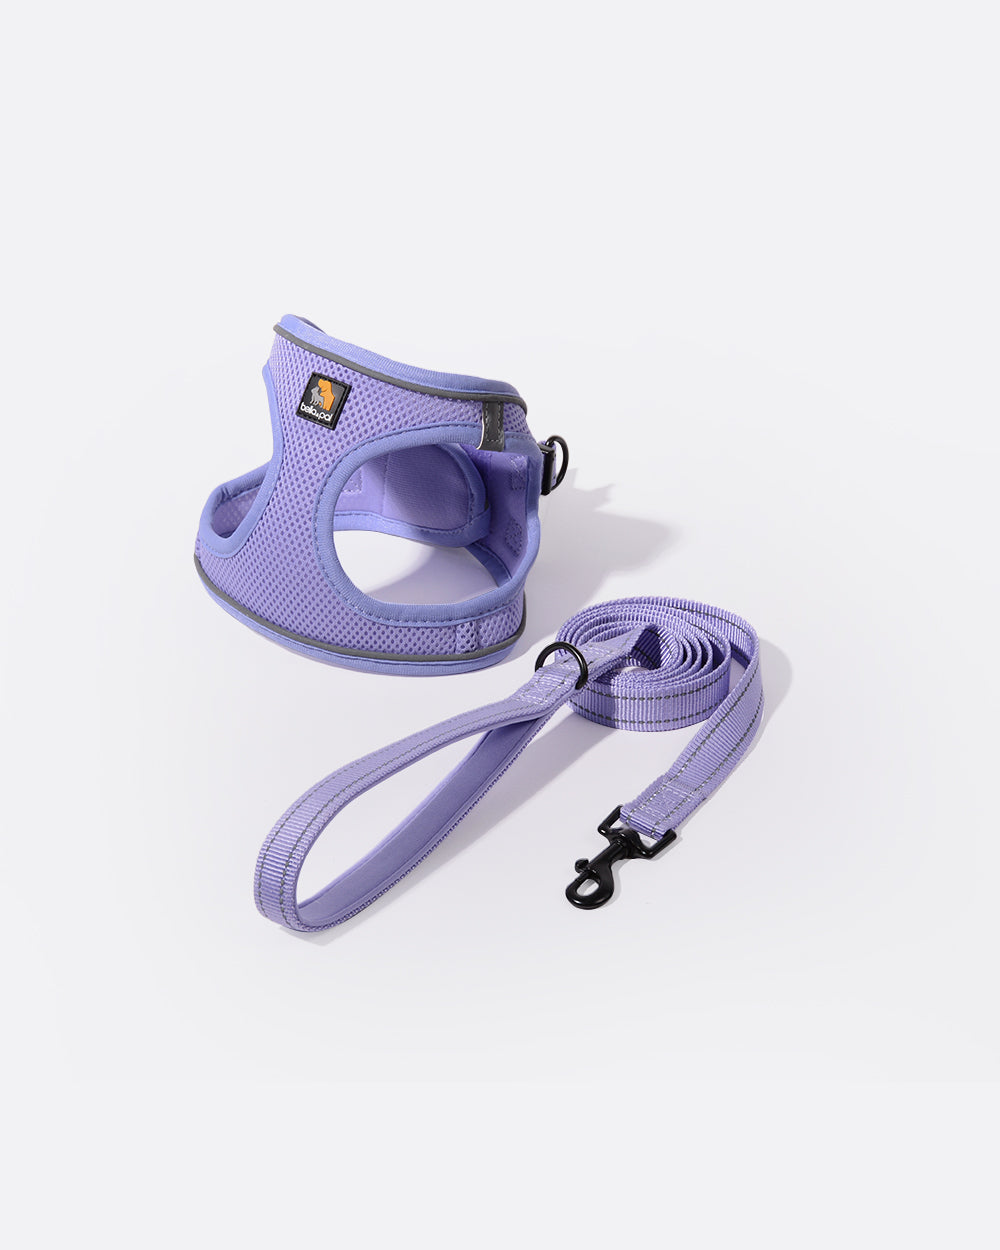 OxyMesh Step-in Harness and Leash Set - Lavender